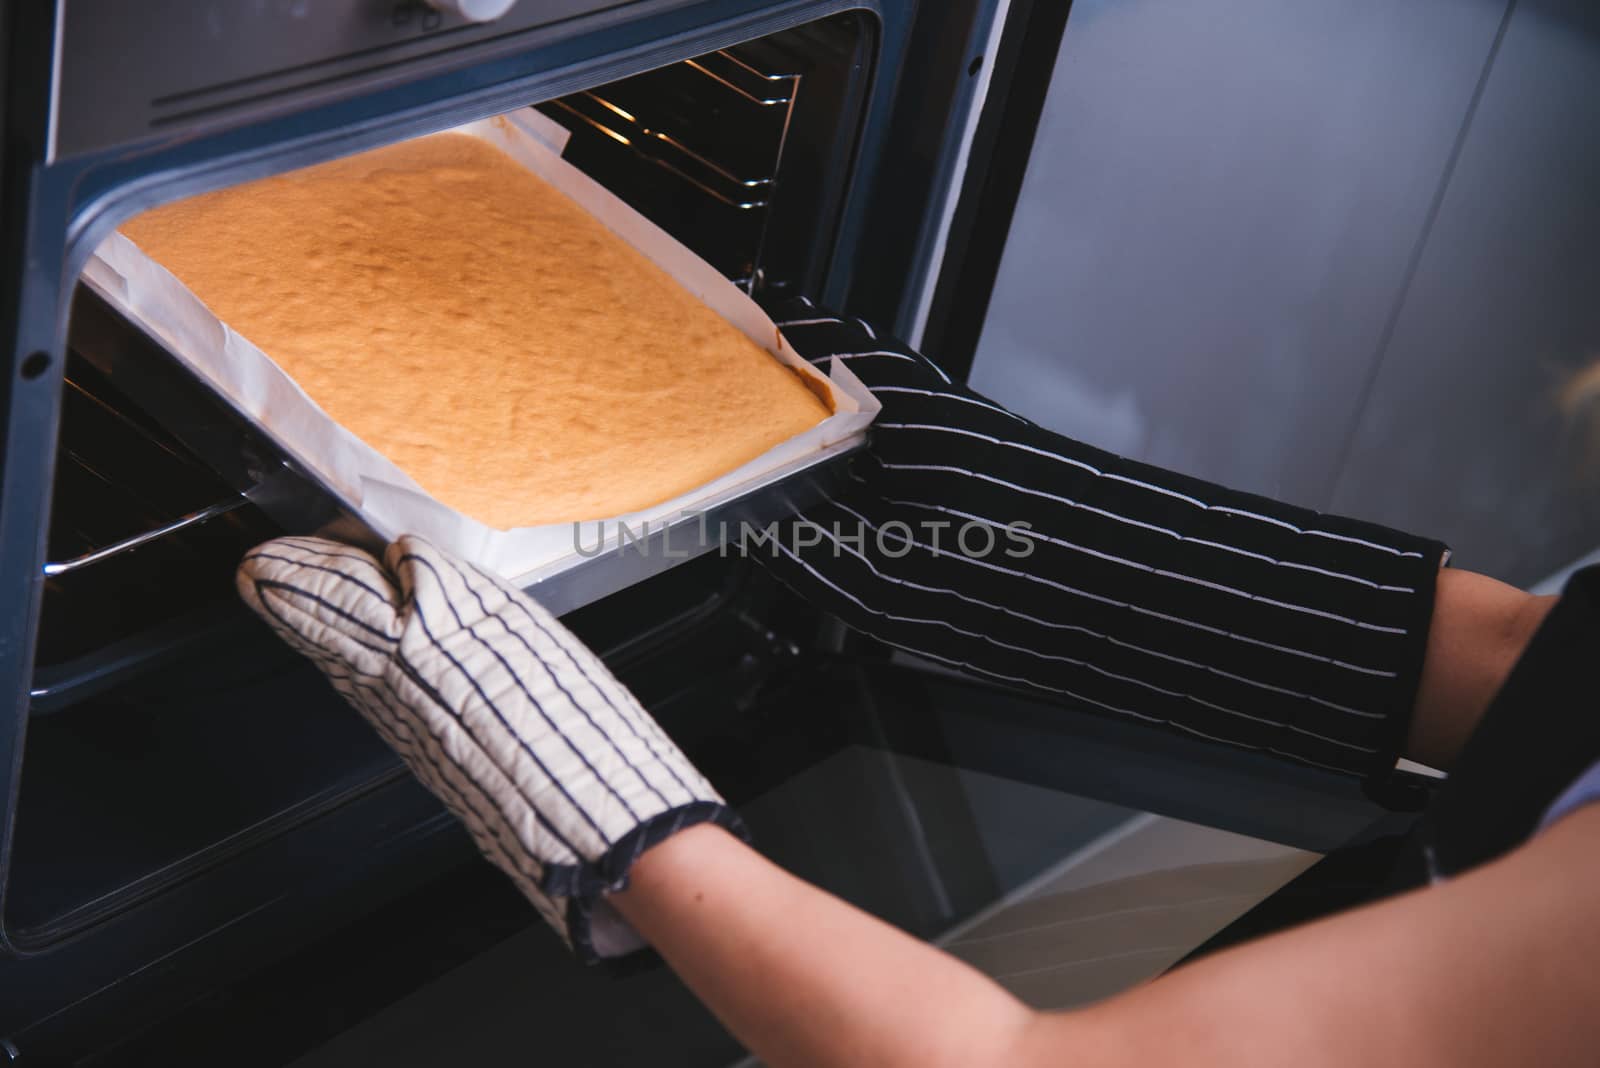 Hands woman holding dough bread bakery cake on front oven by Sorapop